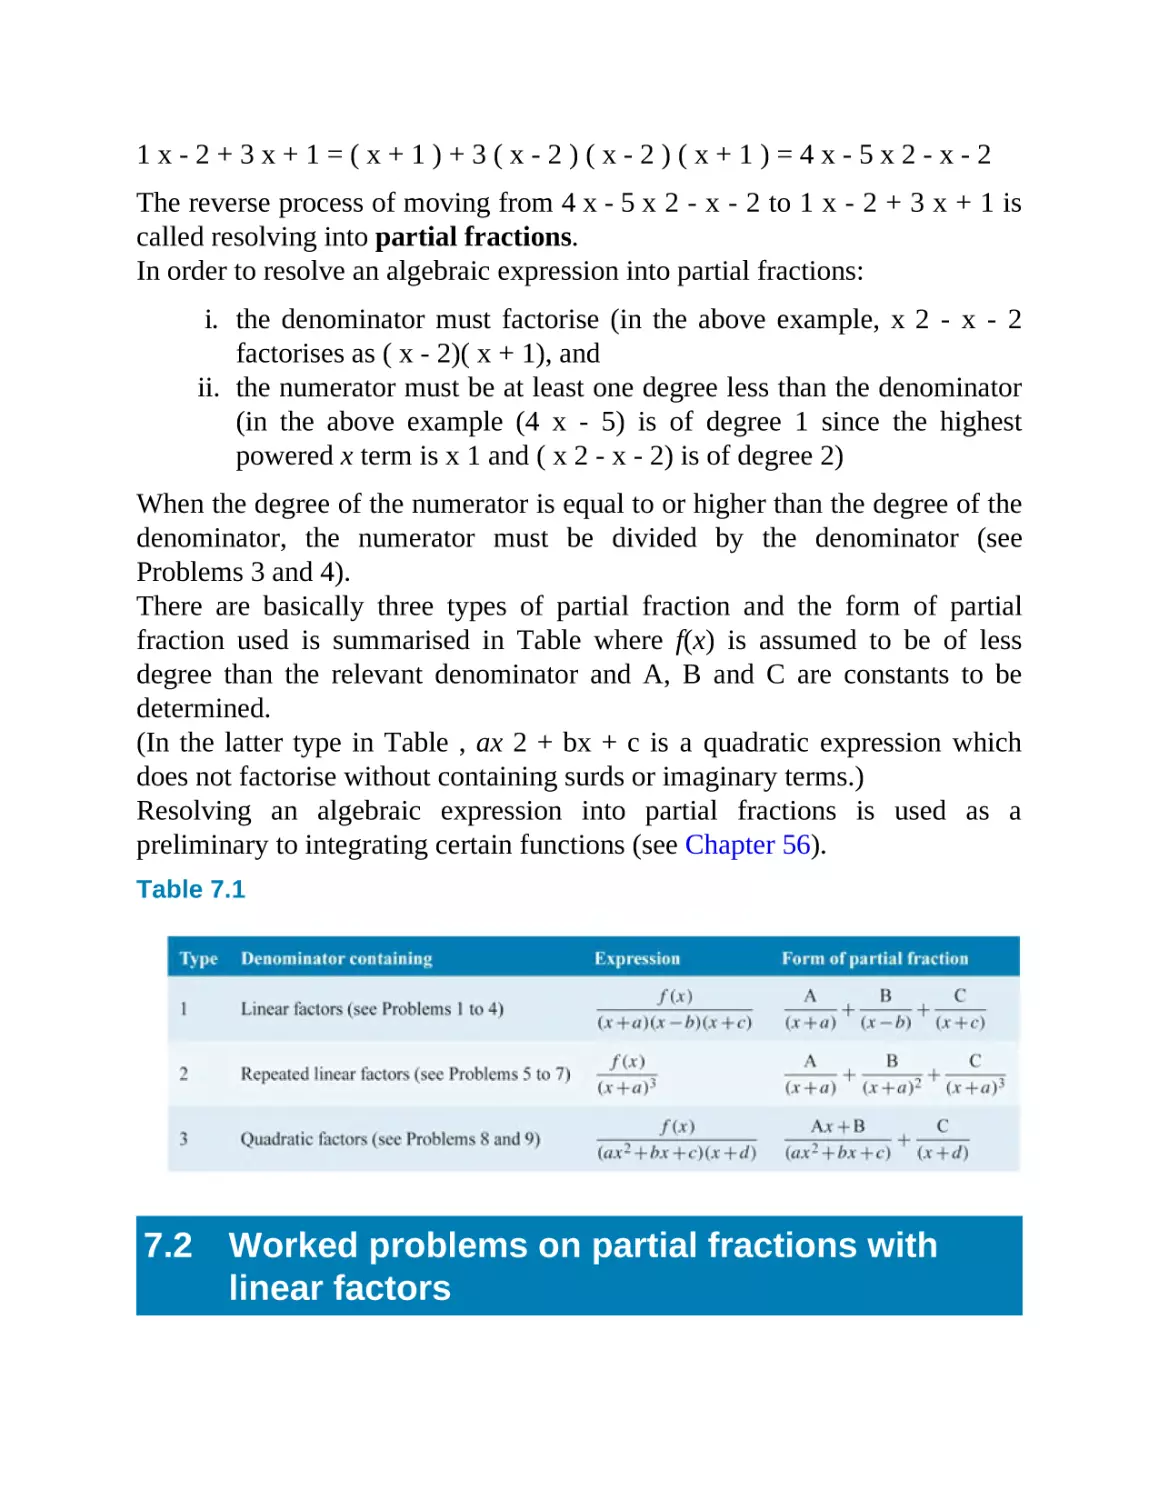 7.2 Worked problems on partial fractions with linear factors